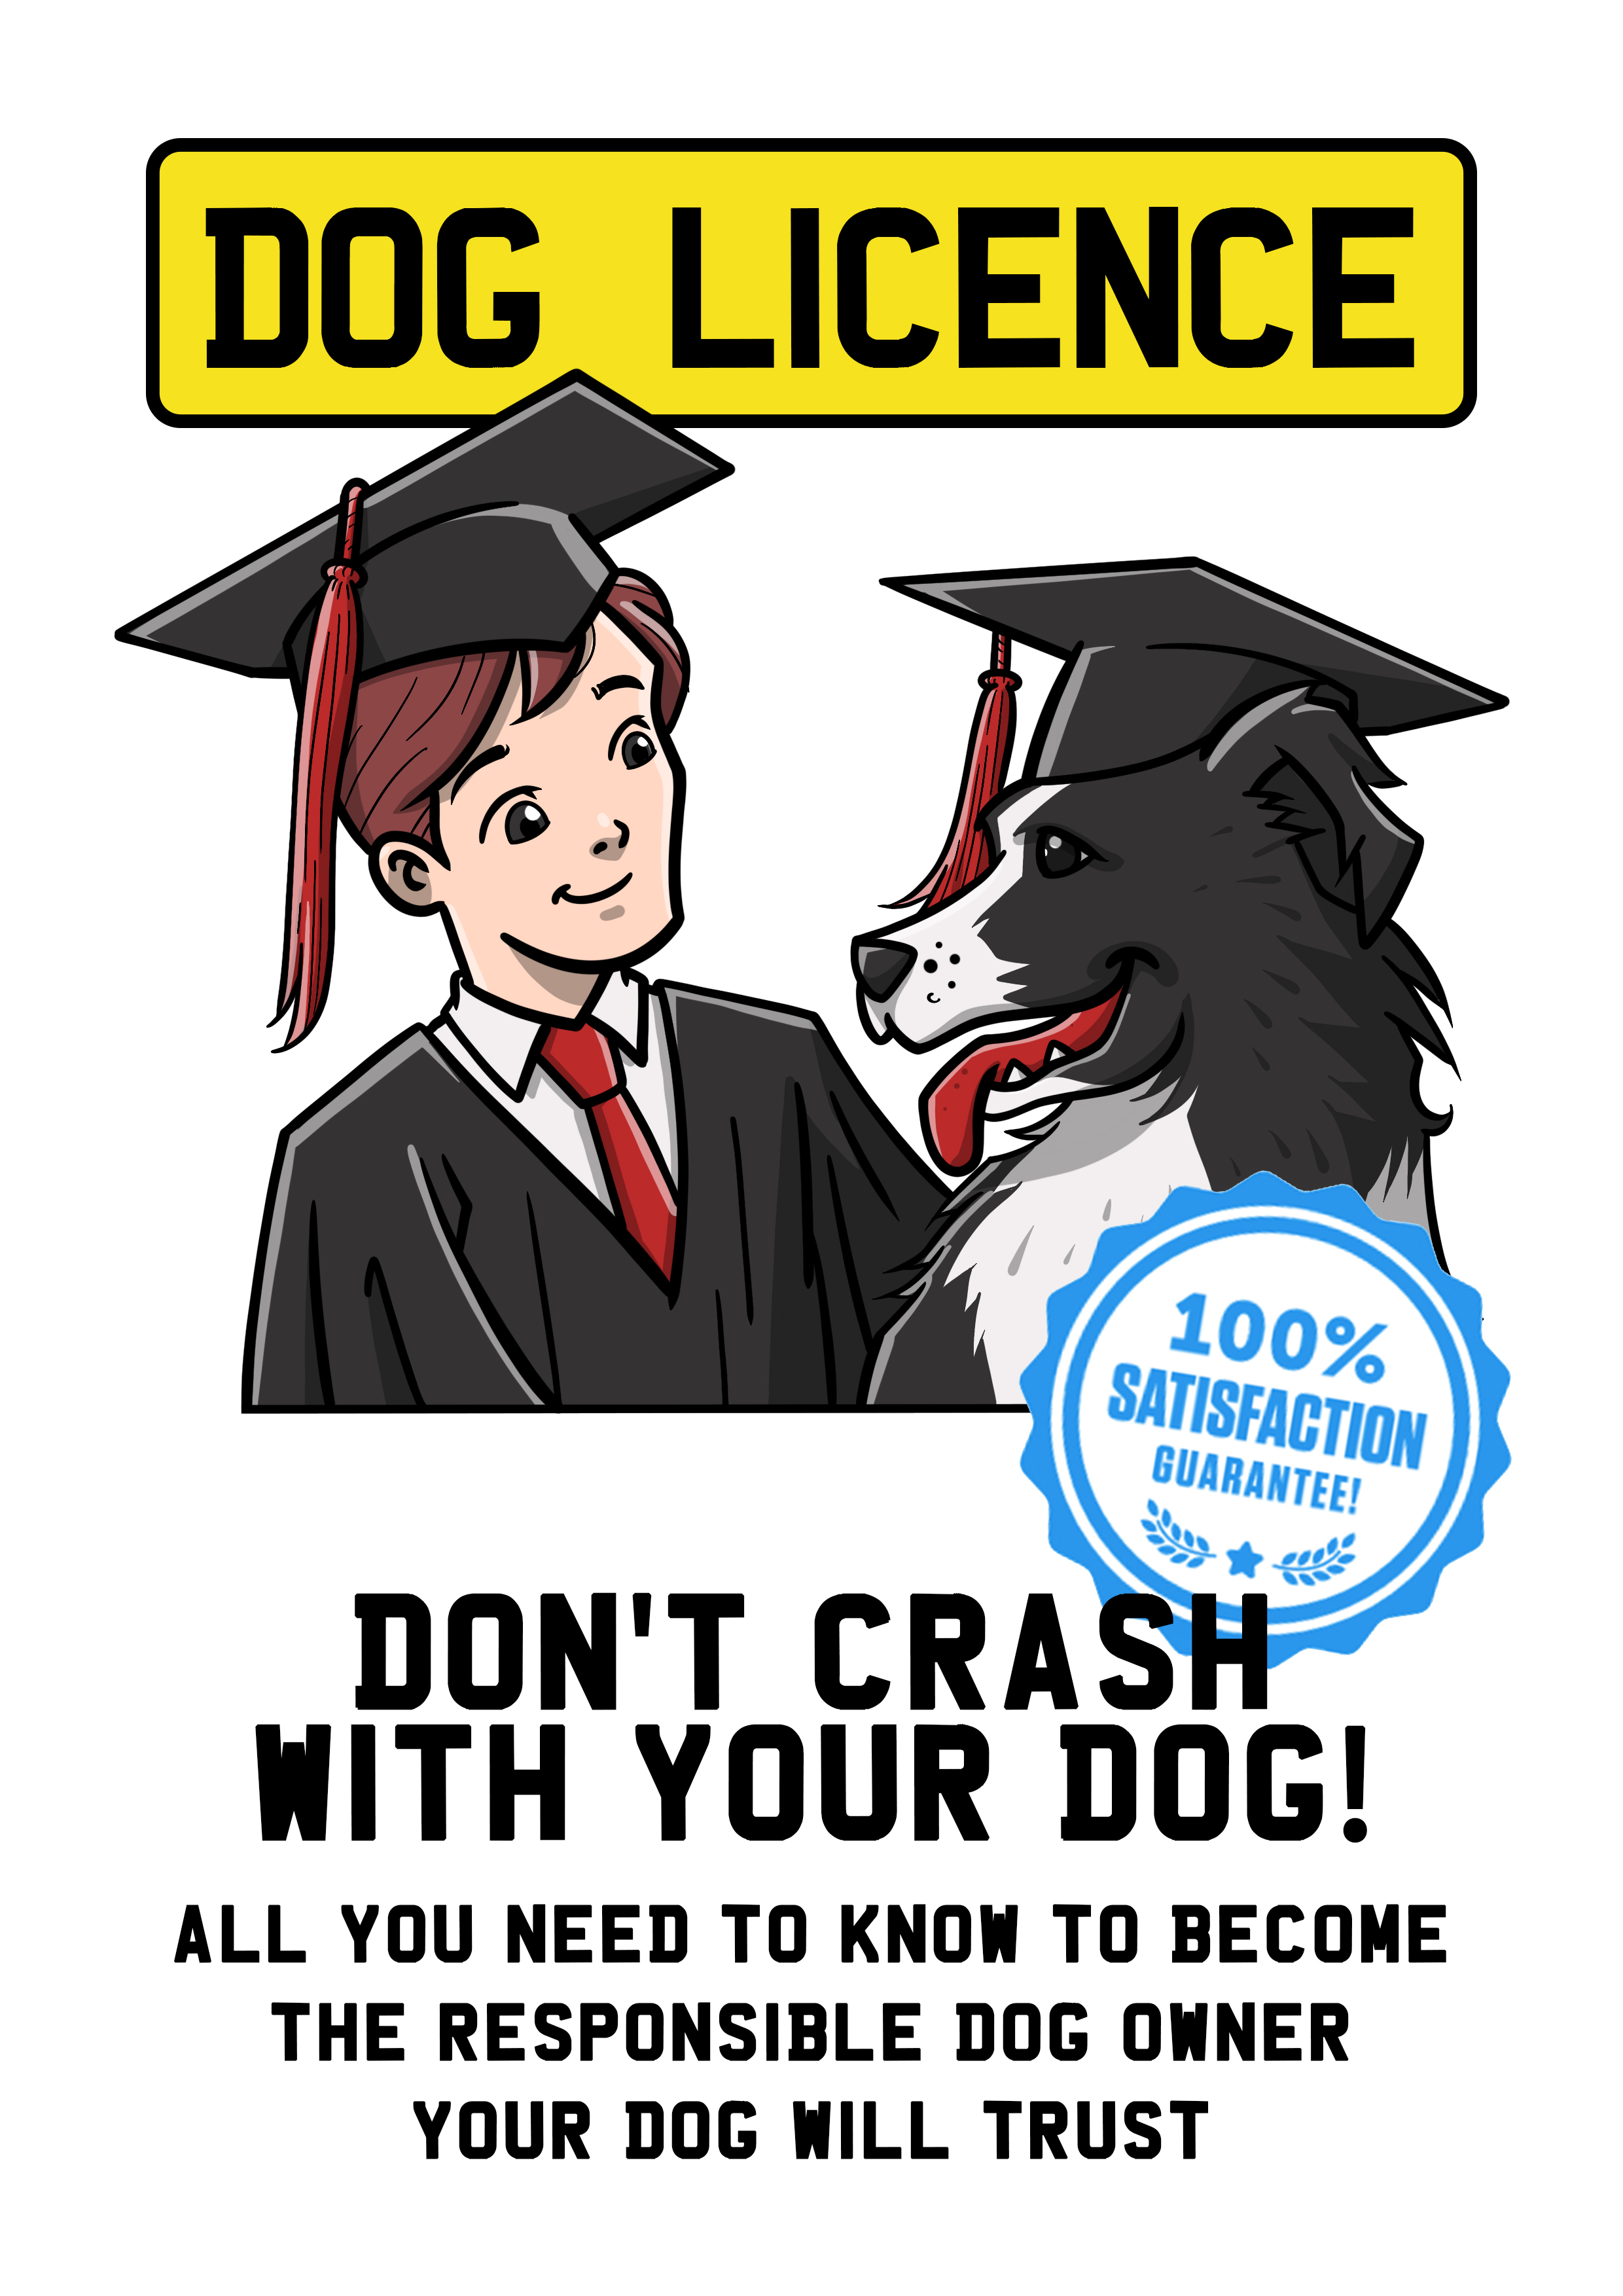 Lorenzo Barichella of Training Dog Launches New Video Course - Dog Licence